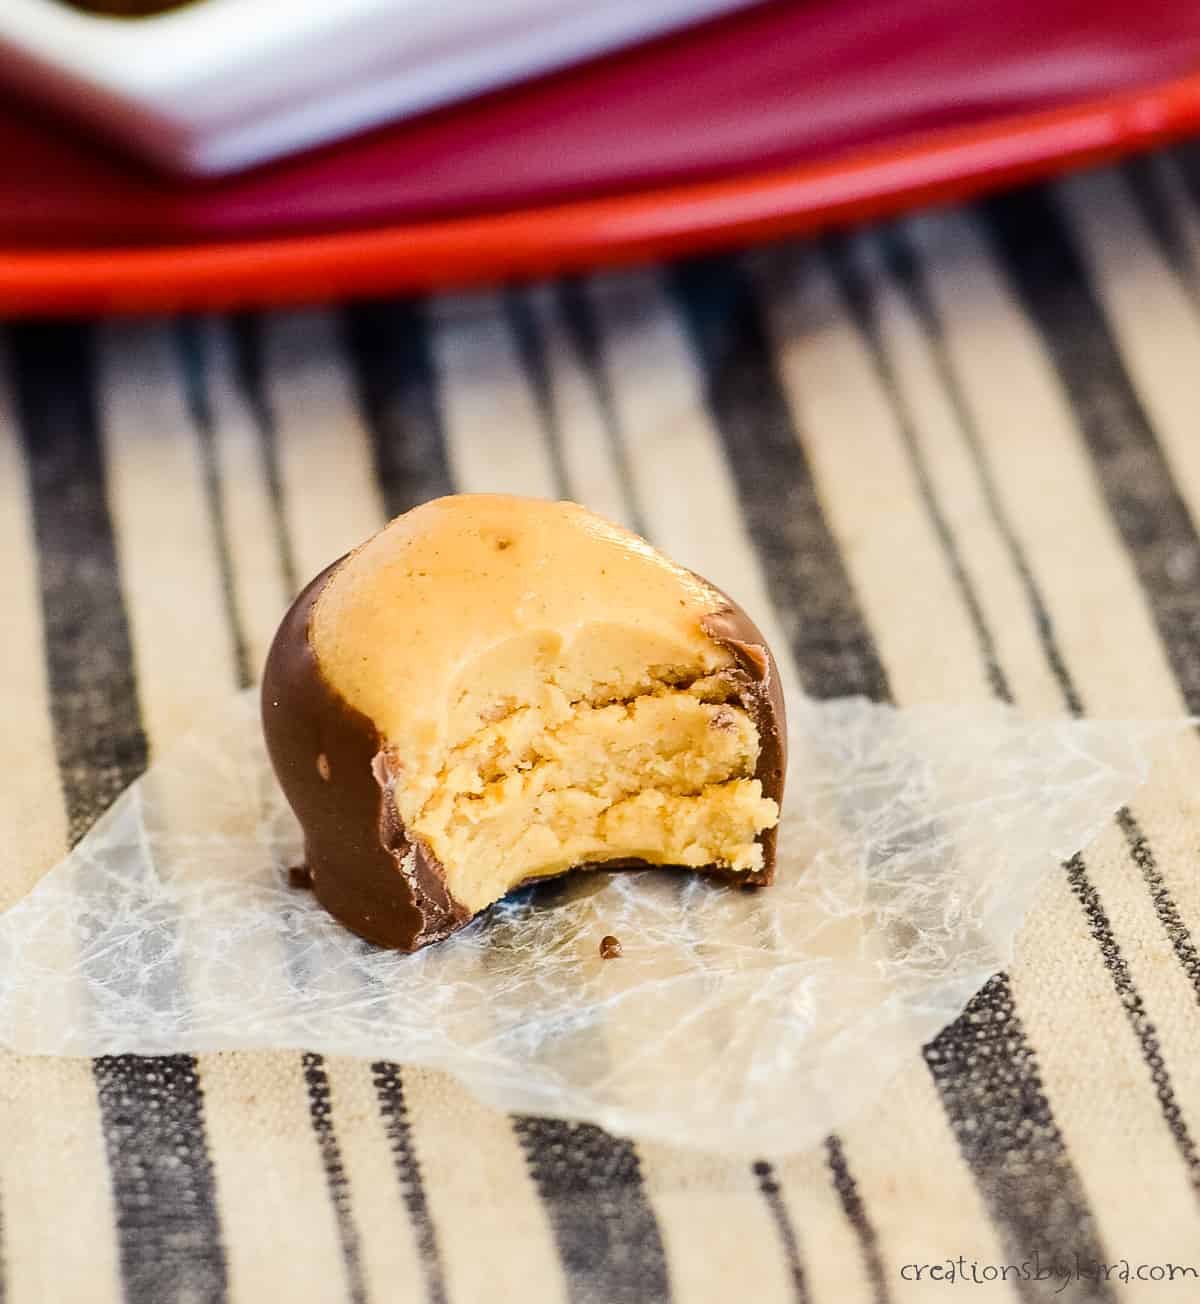 buckeye candy with a bite taken out of it